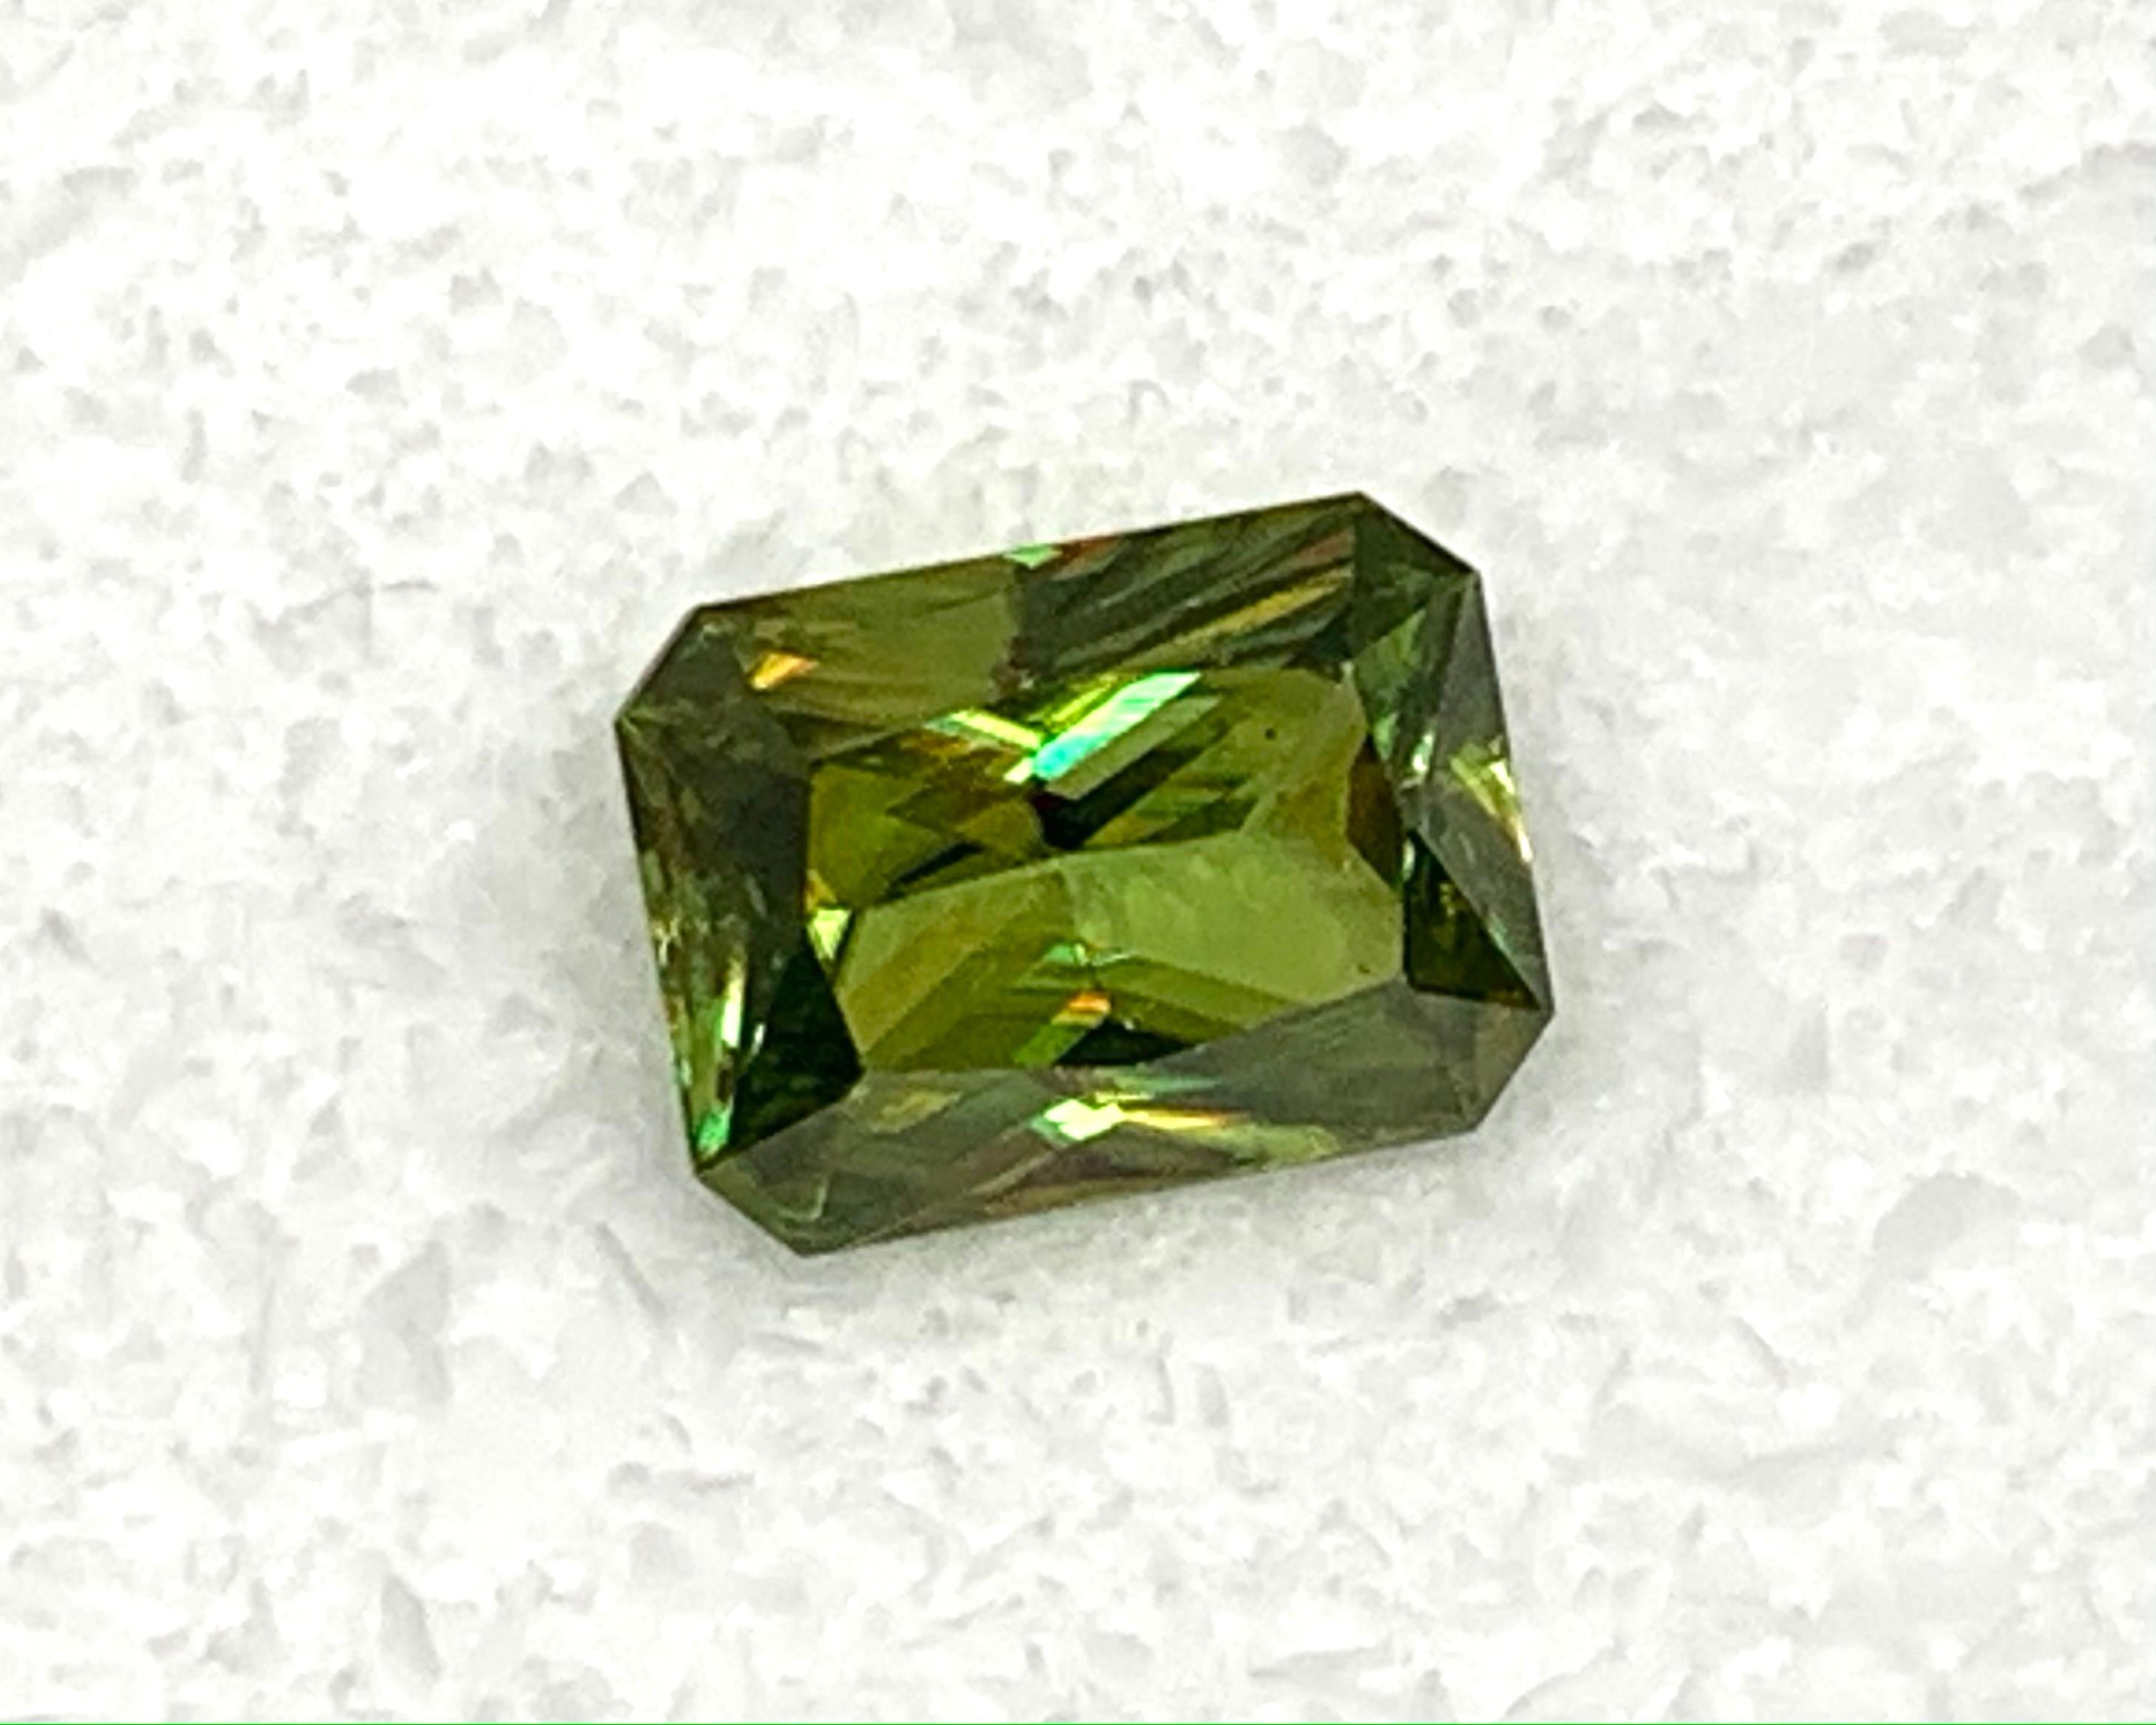 Sphene is an unusual gemstone for the true connoisseur. Known for its impressive 